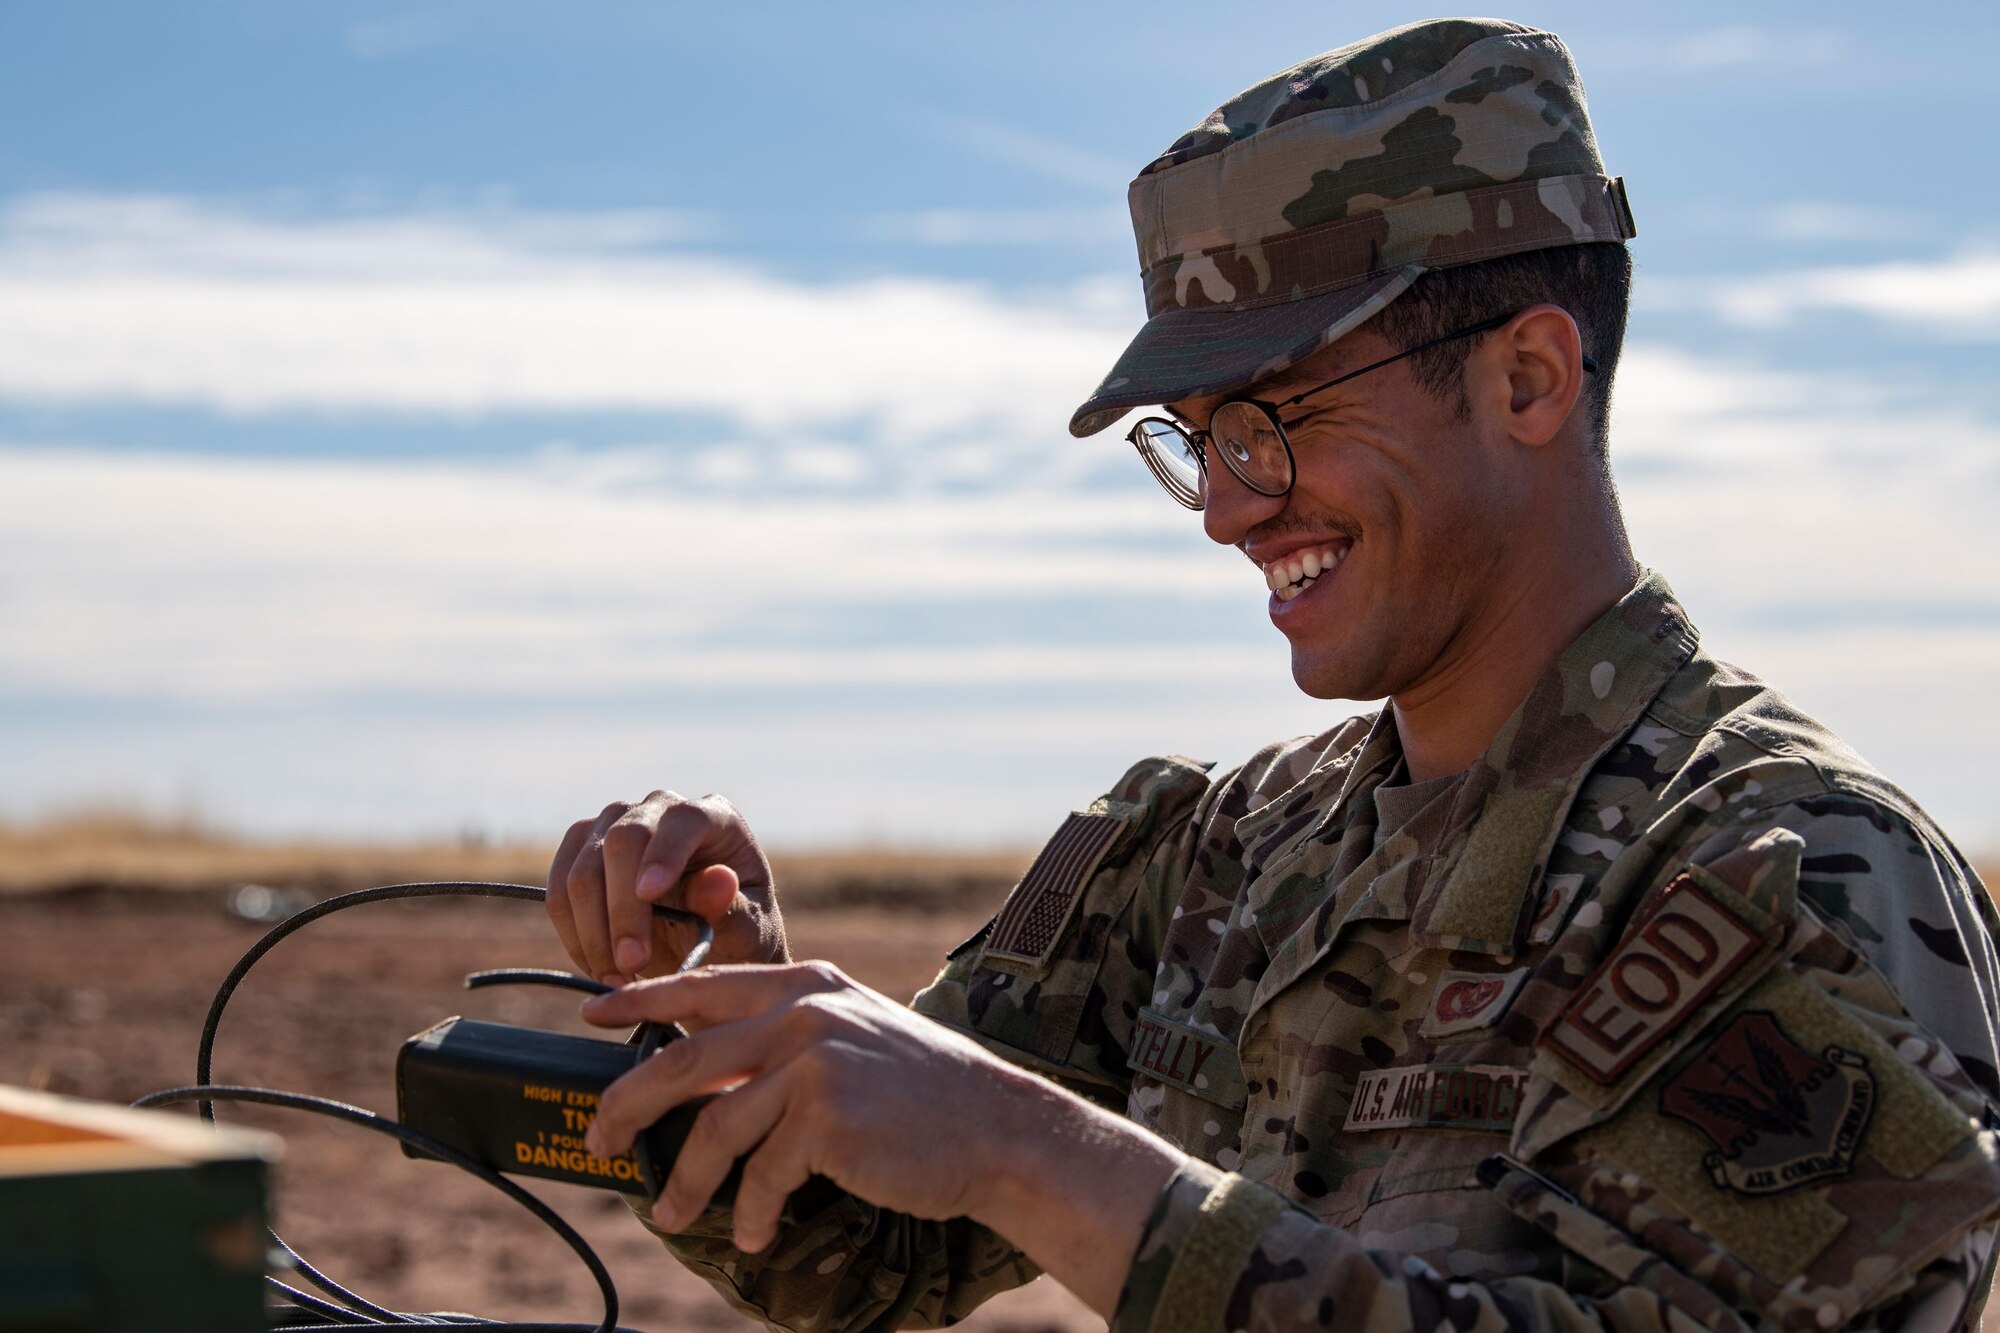 Airman 1st Class Donnovan Stelly, 9th Civil Engineering Squadron Explosive Ordnance Disposal team member, wraps detonating cord around some TNT during military working dog detection training on Beale Air Force Base.